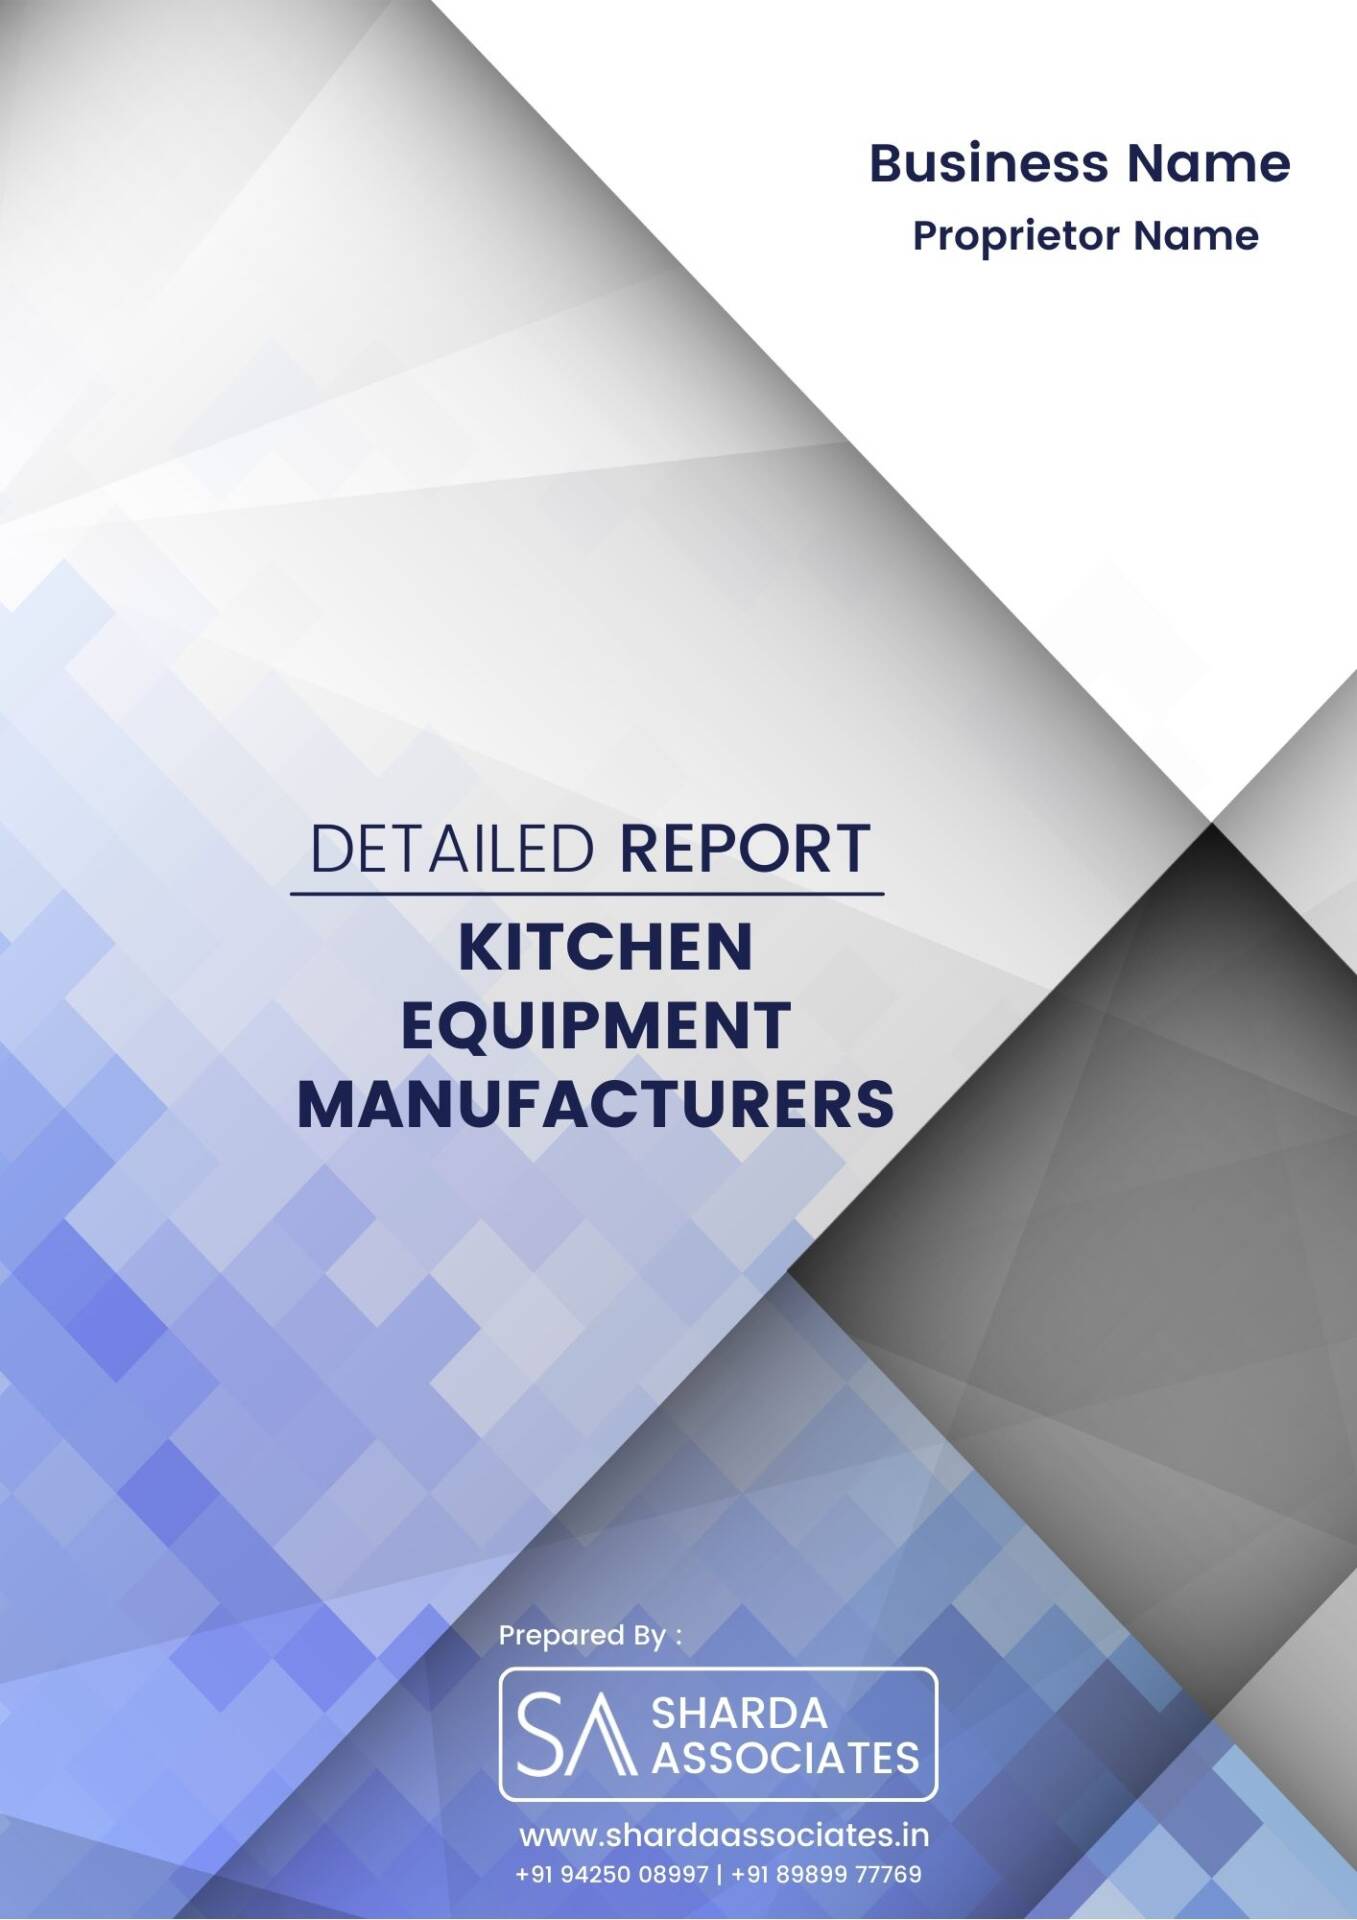 Detailed Report On Kitchen Equipment Manufacturers​